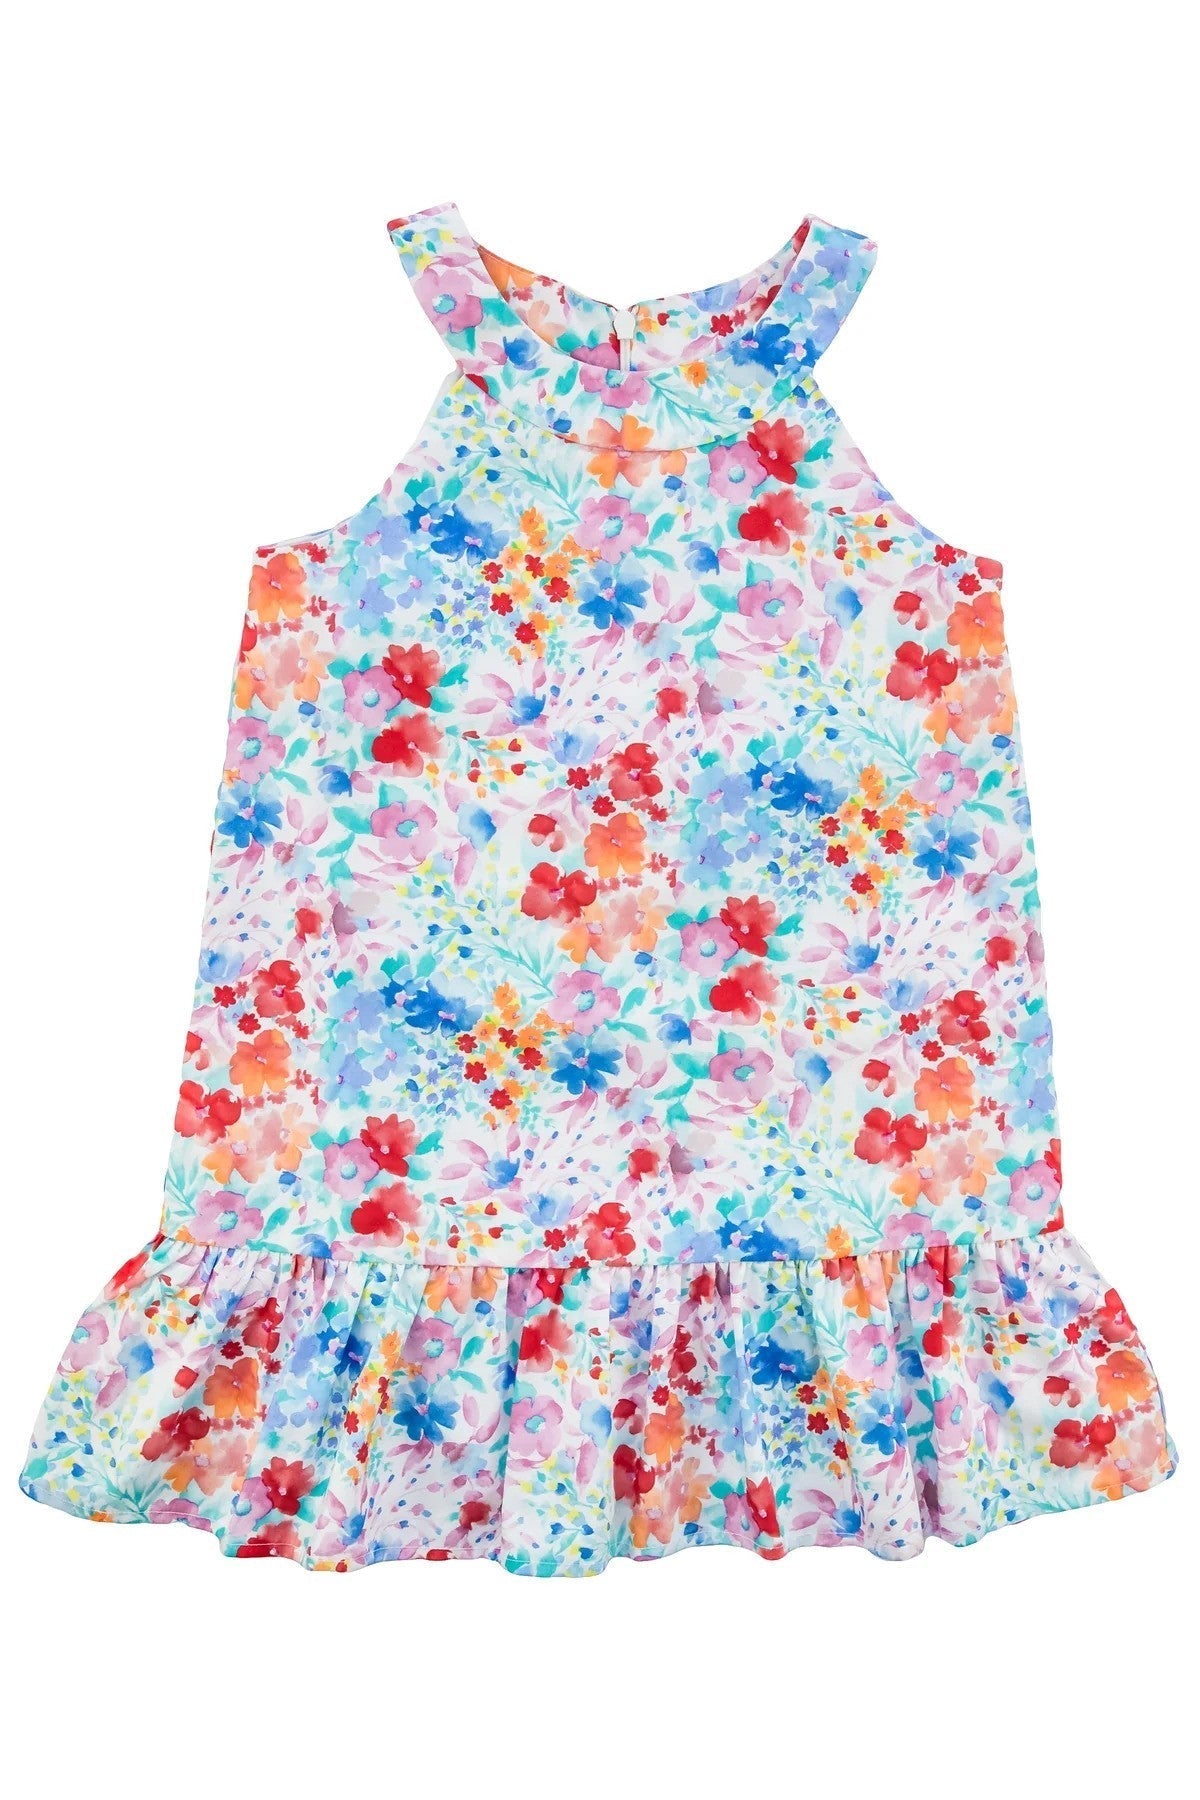 Florence Eiseman Apparel & Gifts Florence Eiseman Floral Dress With Shirred Skirt